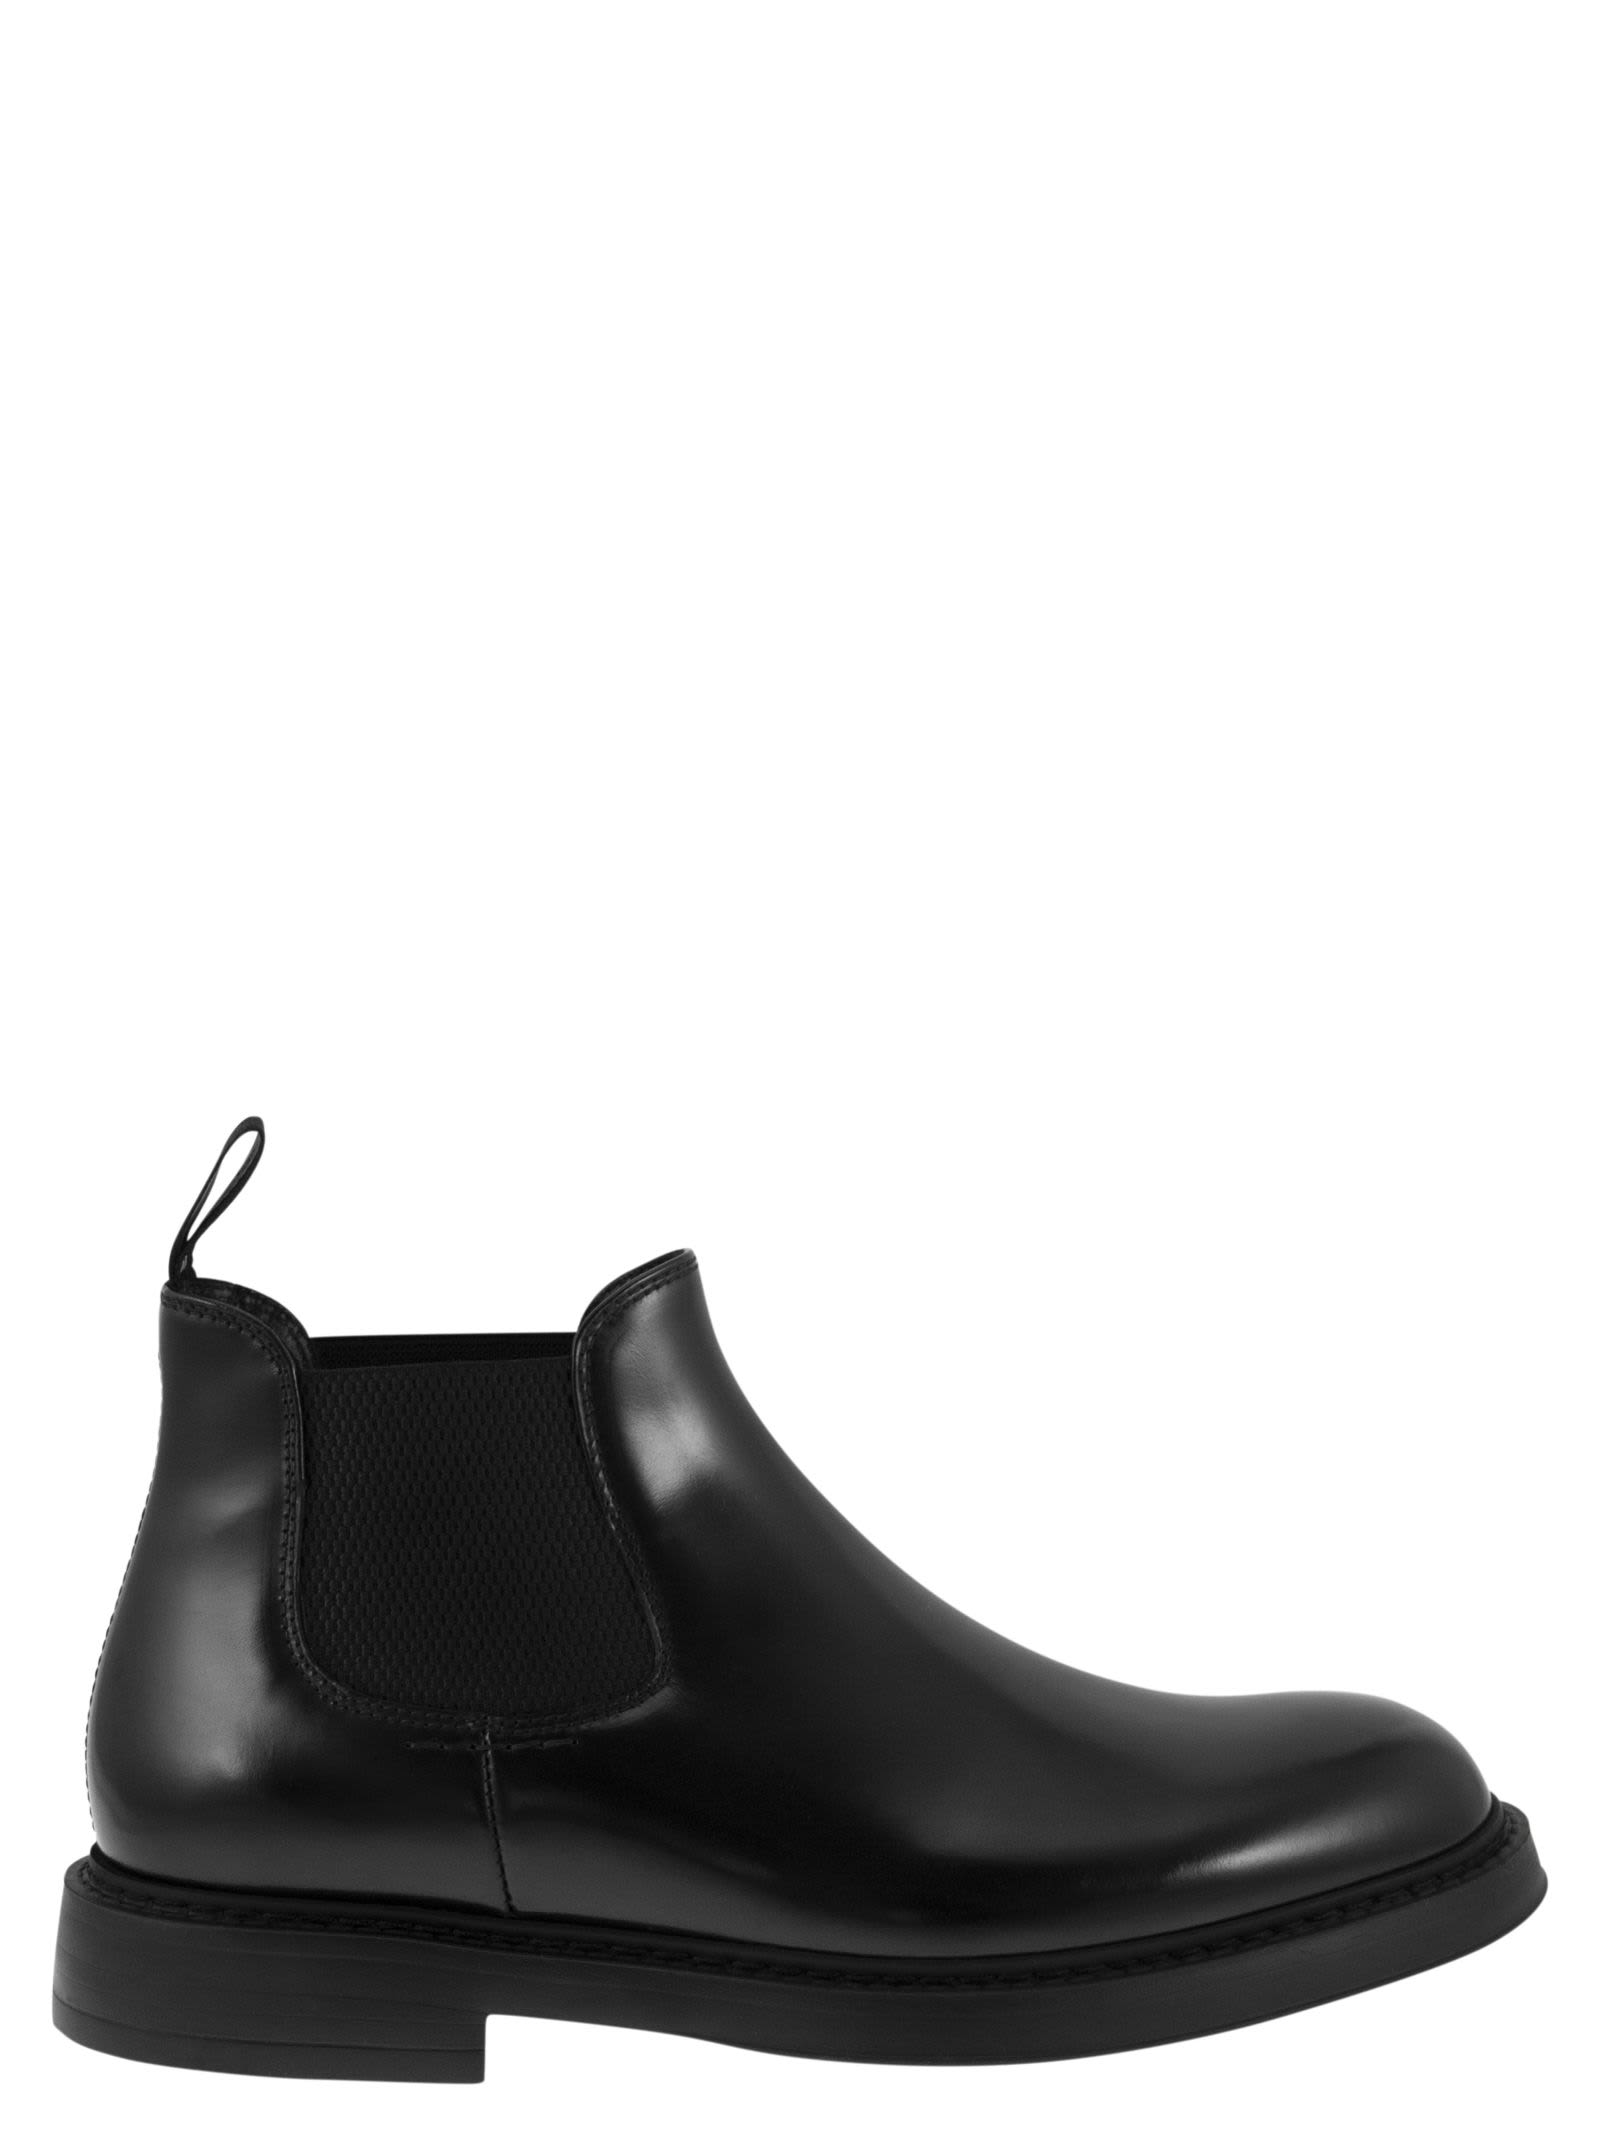 DOUCAL'S CHELSEA LEATHER ANKLE BOOT DOUCALS